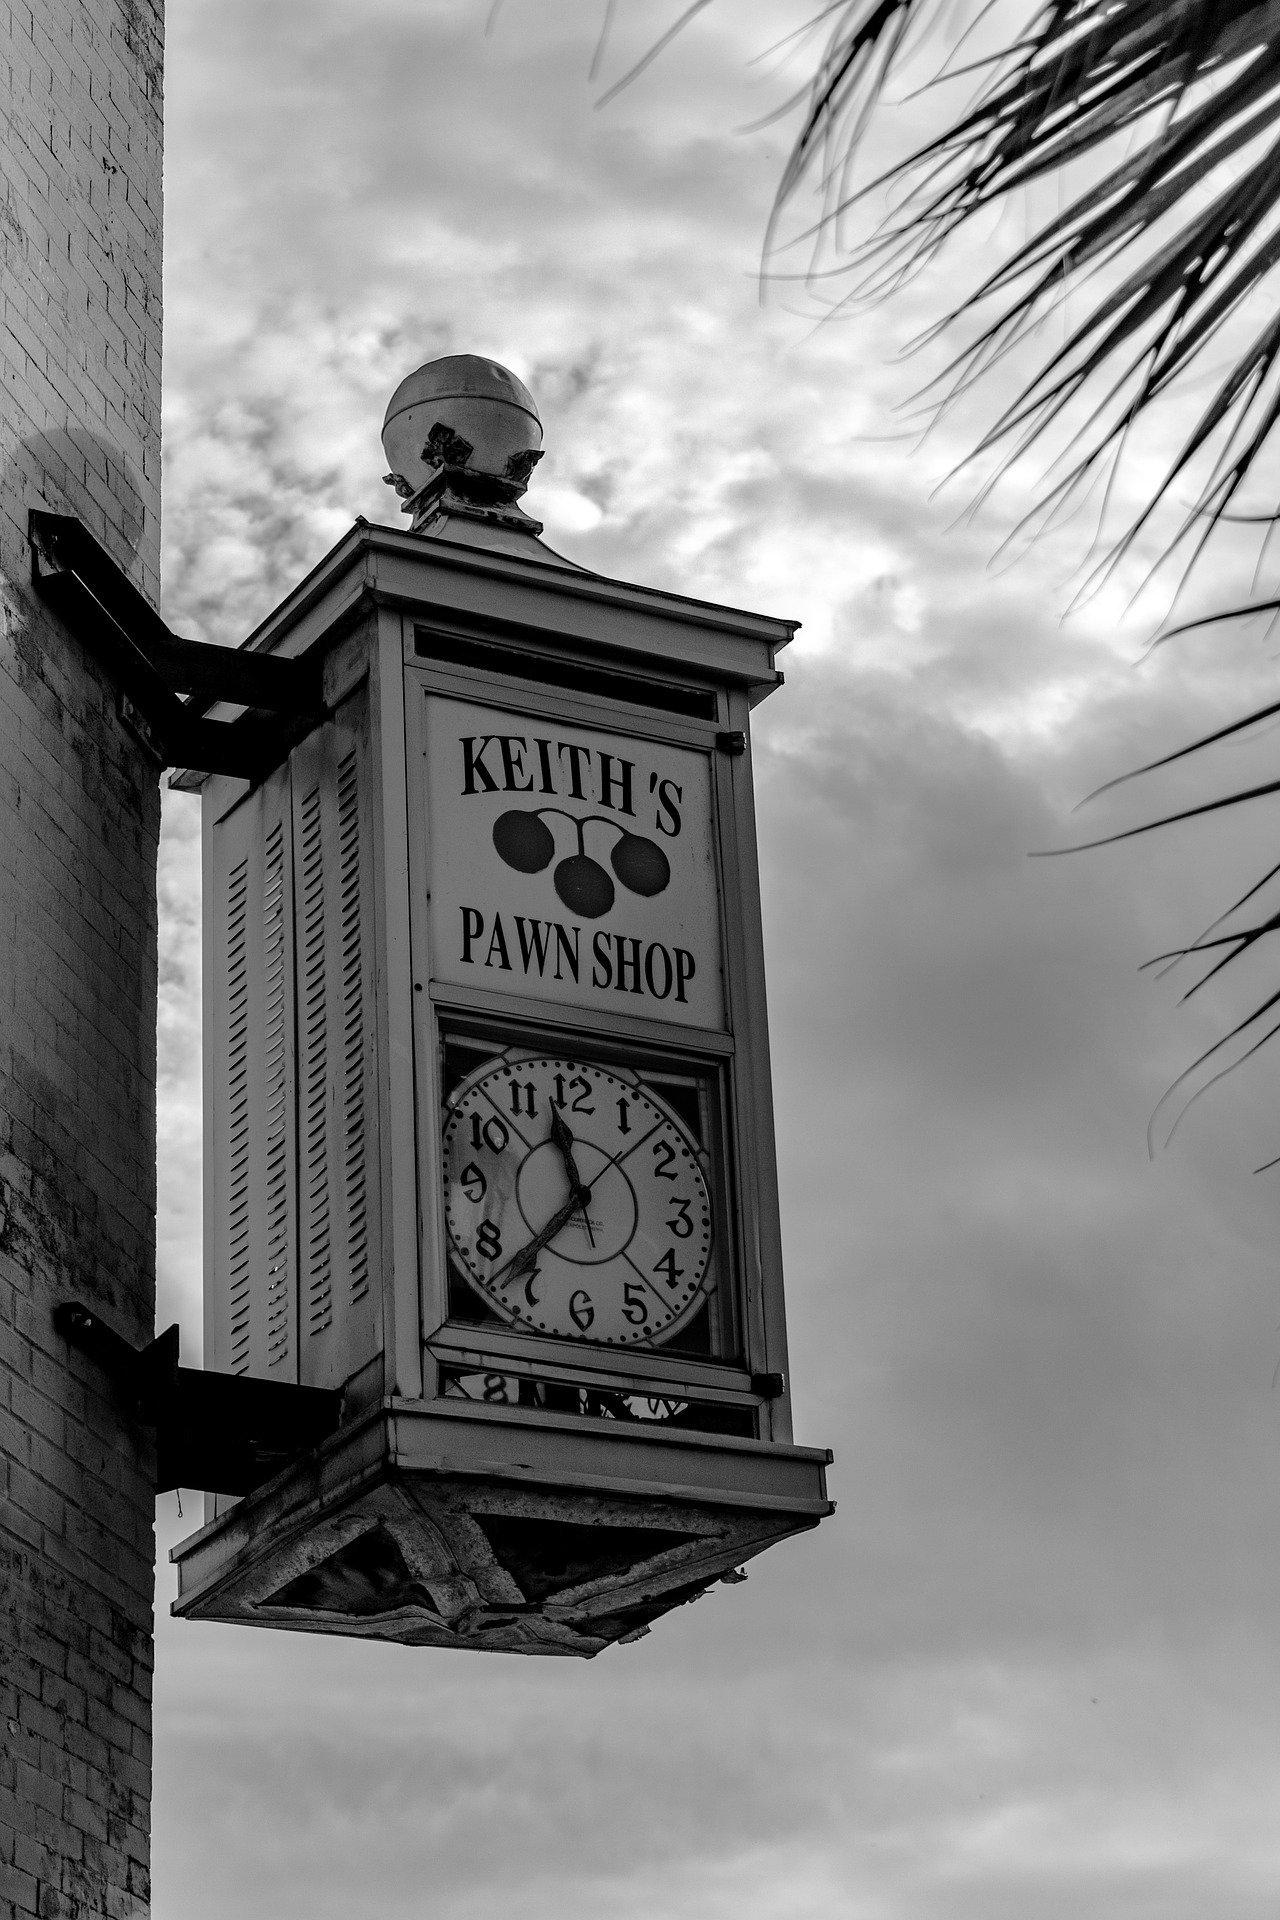 A black-and-white image of a sign for a pawn shop | Photo: Pixabay/jeffshattuck